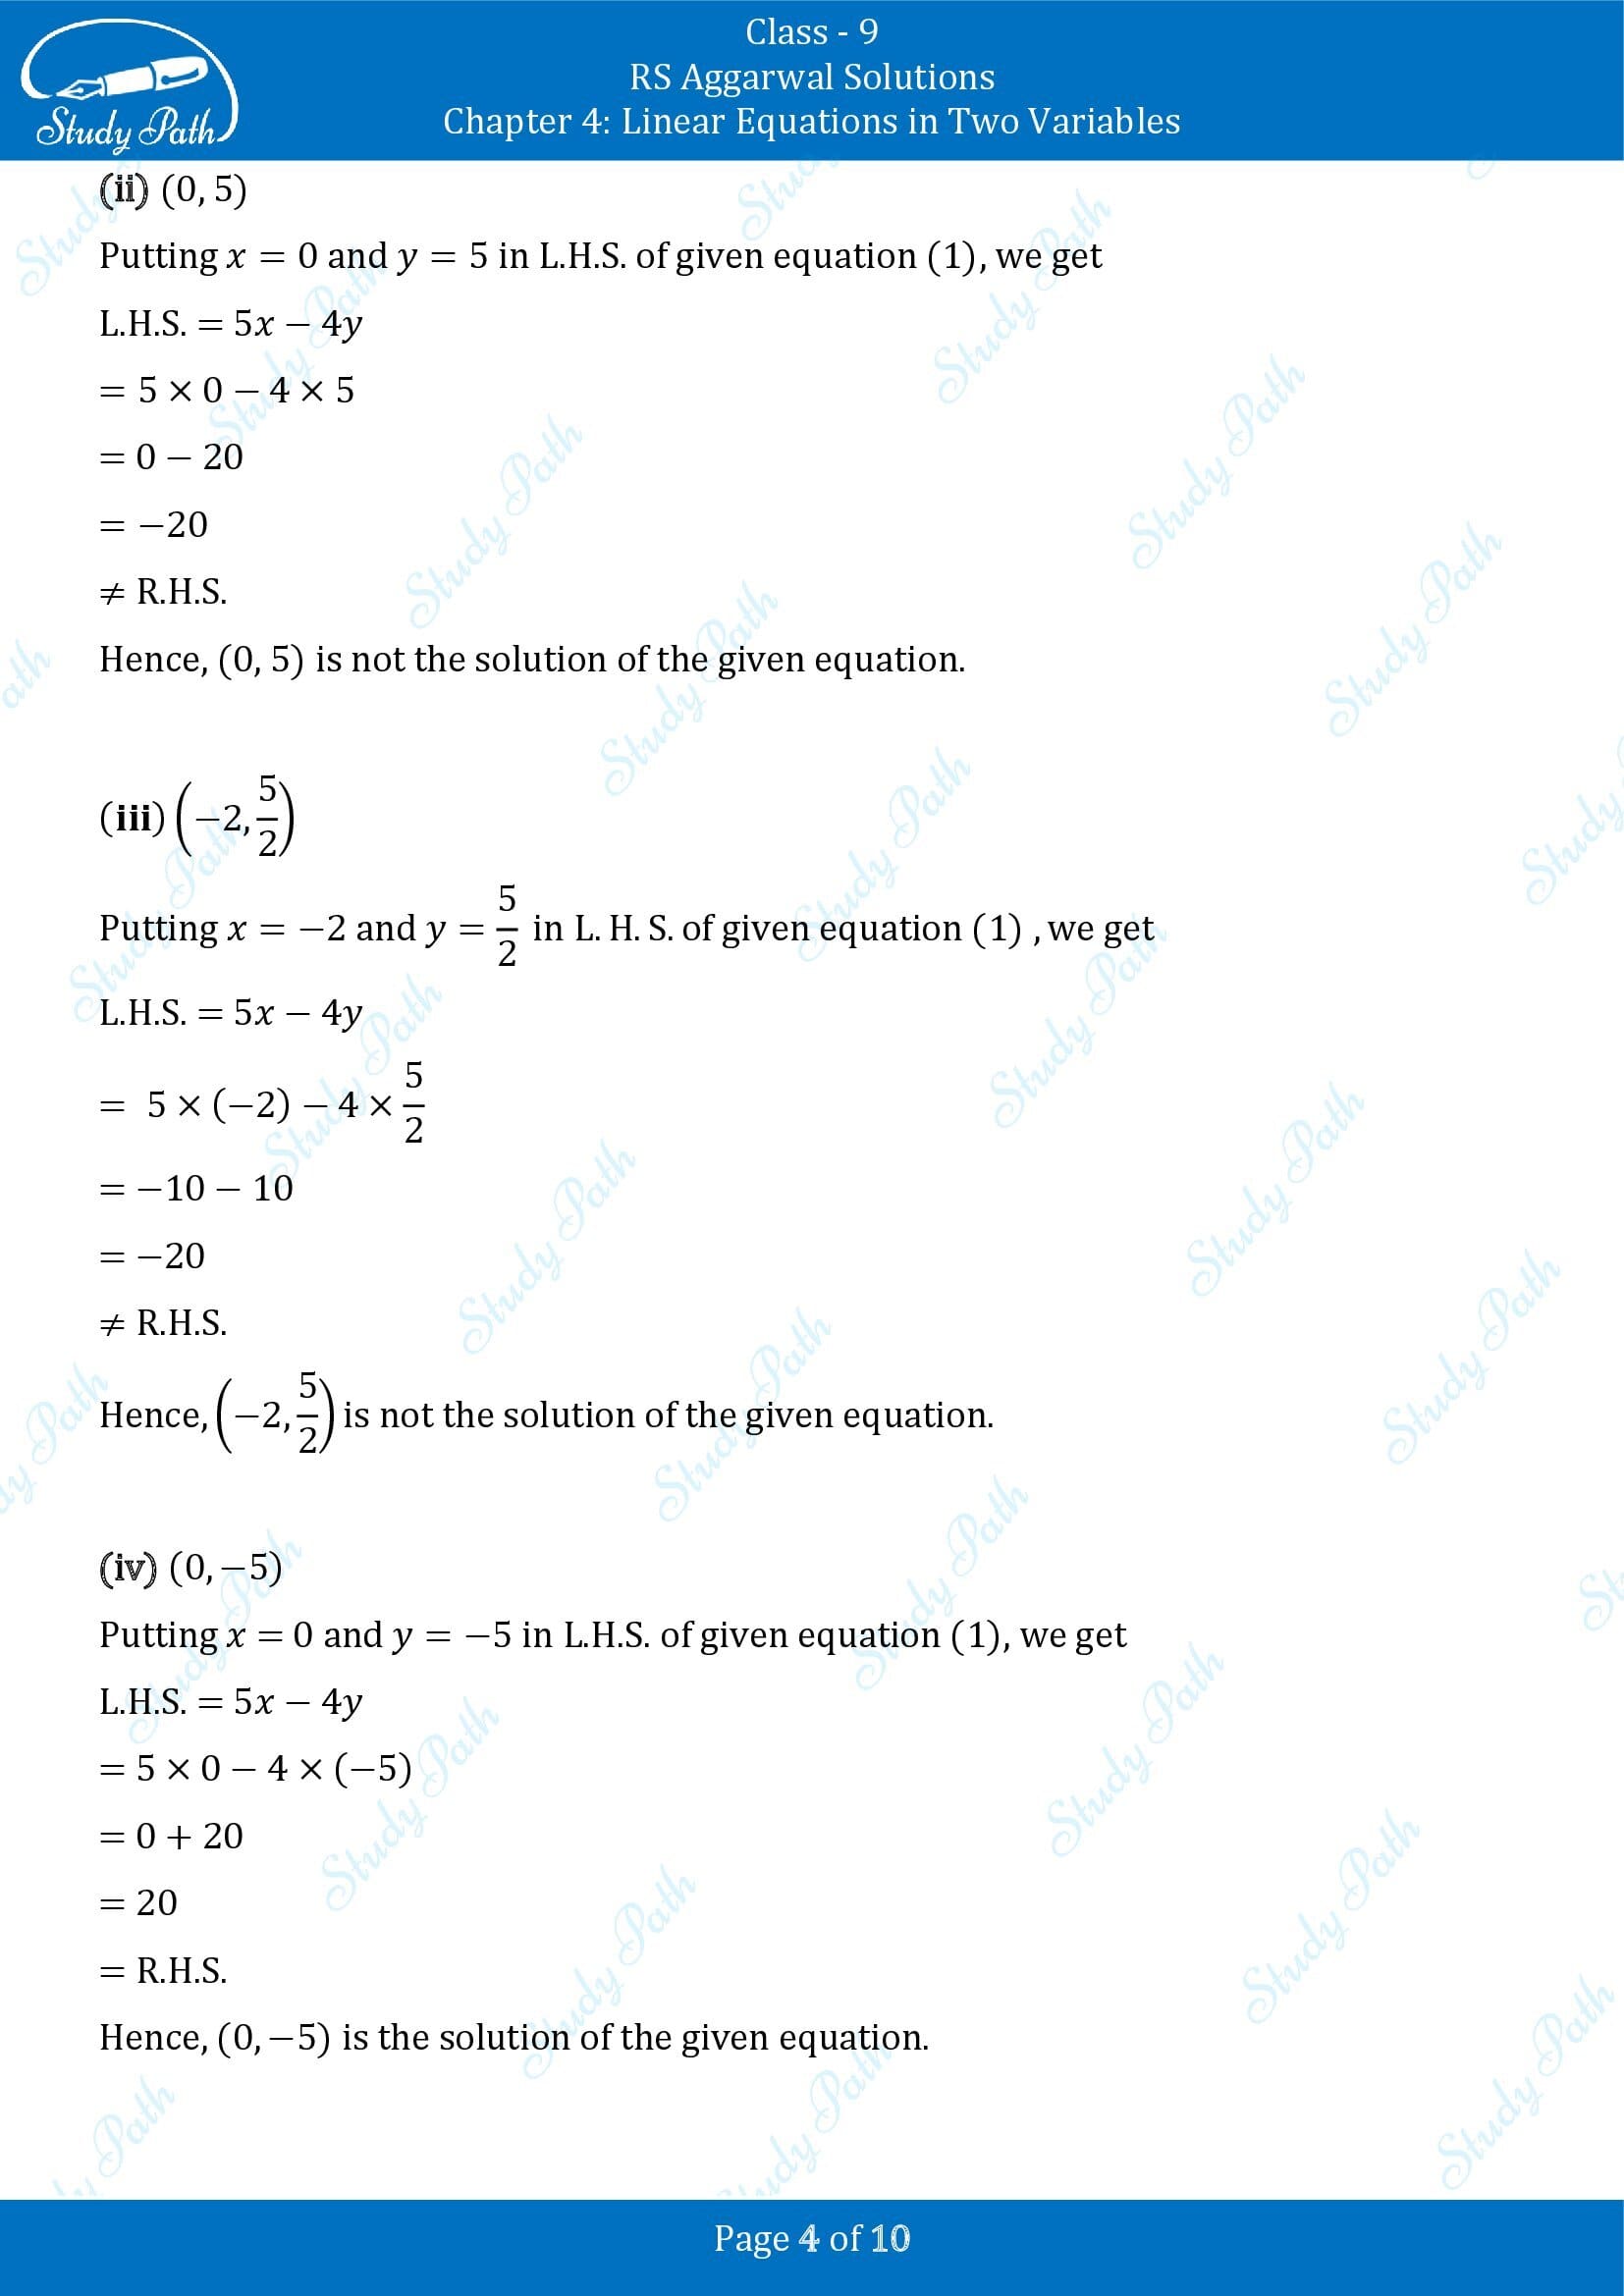 RS Aggarwal Solutions Class 9 Chapter 4 Linear Equations in Two Variables Exercise 4A 0004